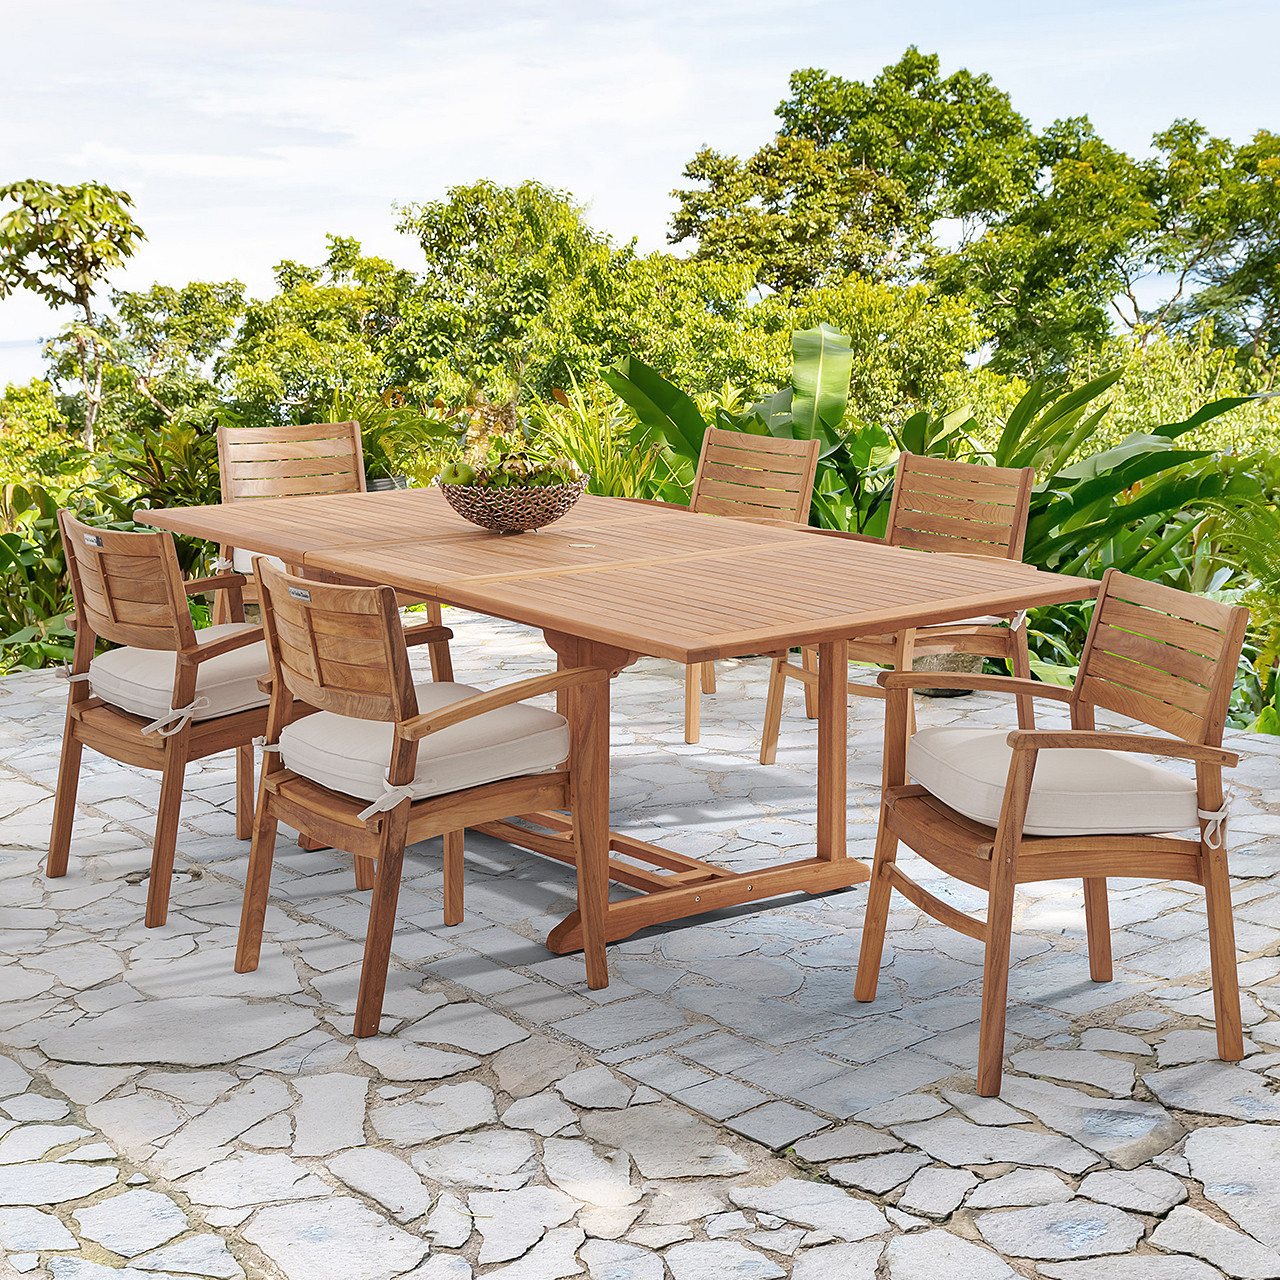 Warwick Teak with Cushions 7 Piece Dining Set + Bristol 67-87 x 47 in. Table